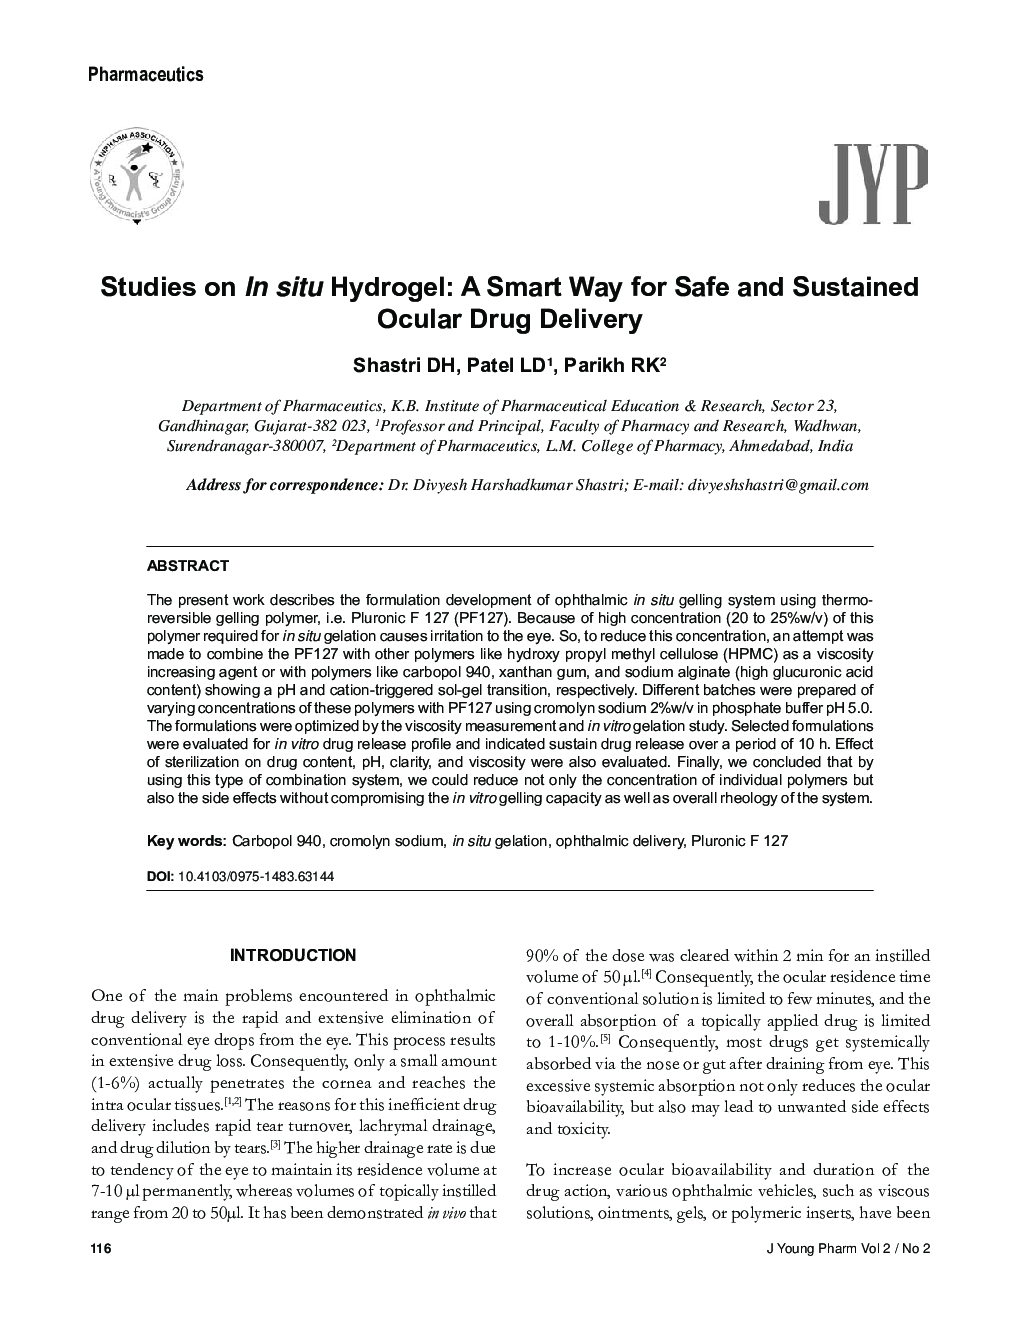 Studies on In situ Hydrogel: A Smart Way for Safe and Sustained Ocular Drug Delivery